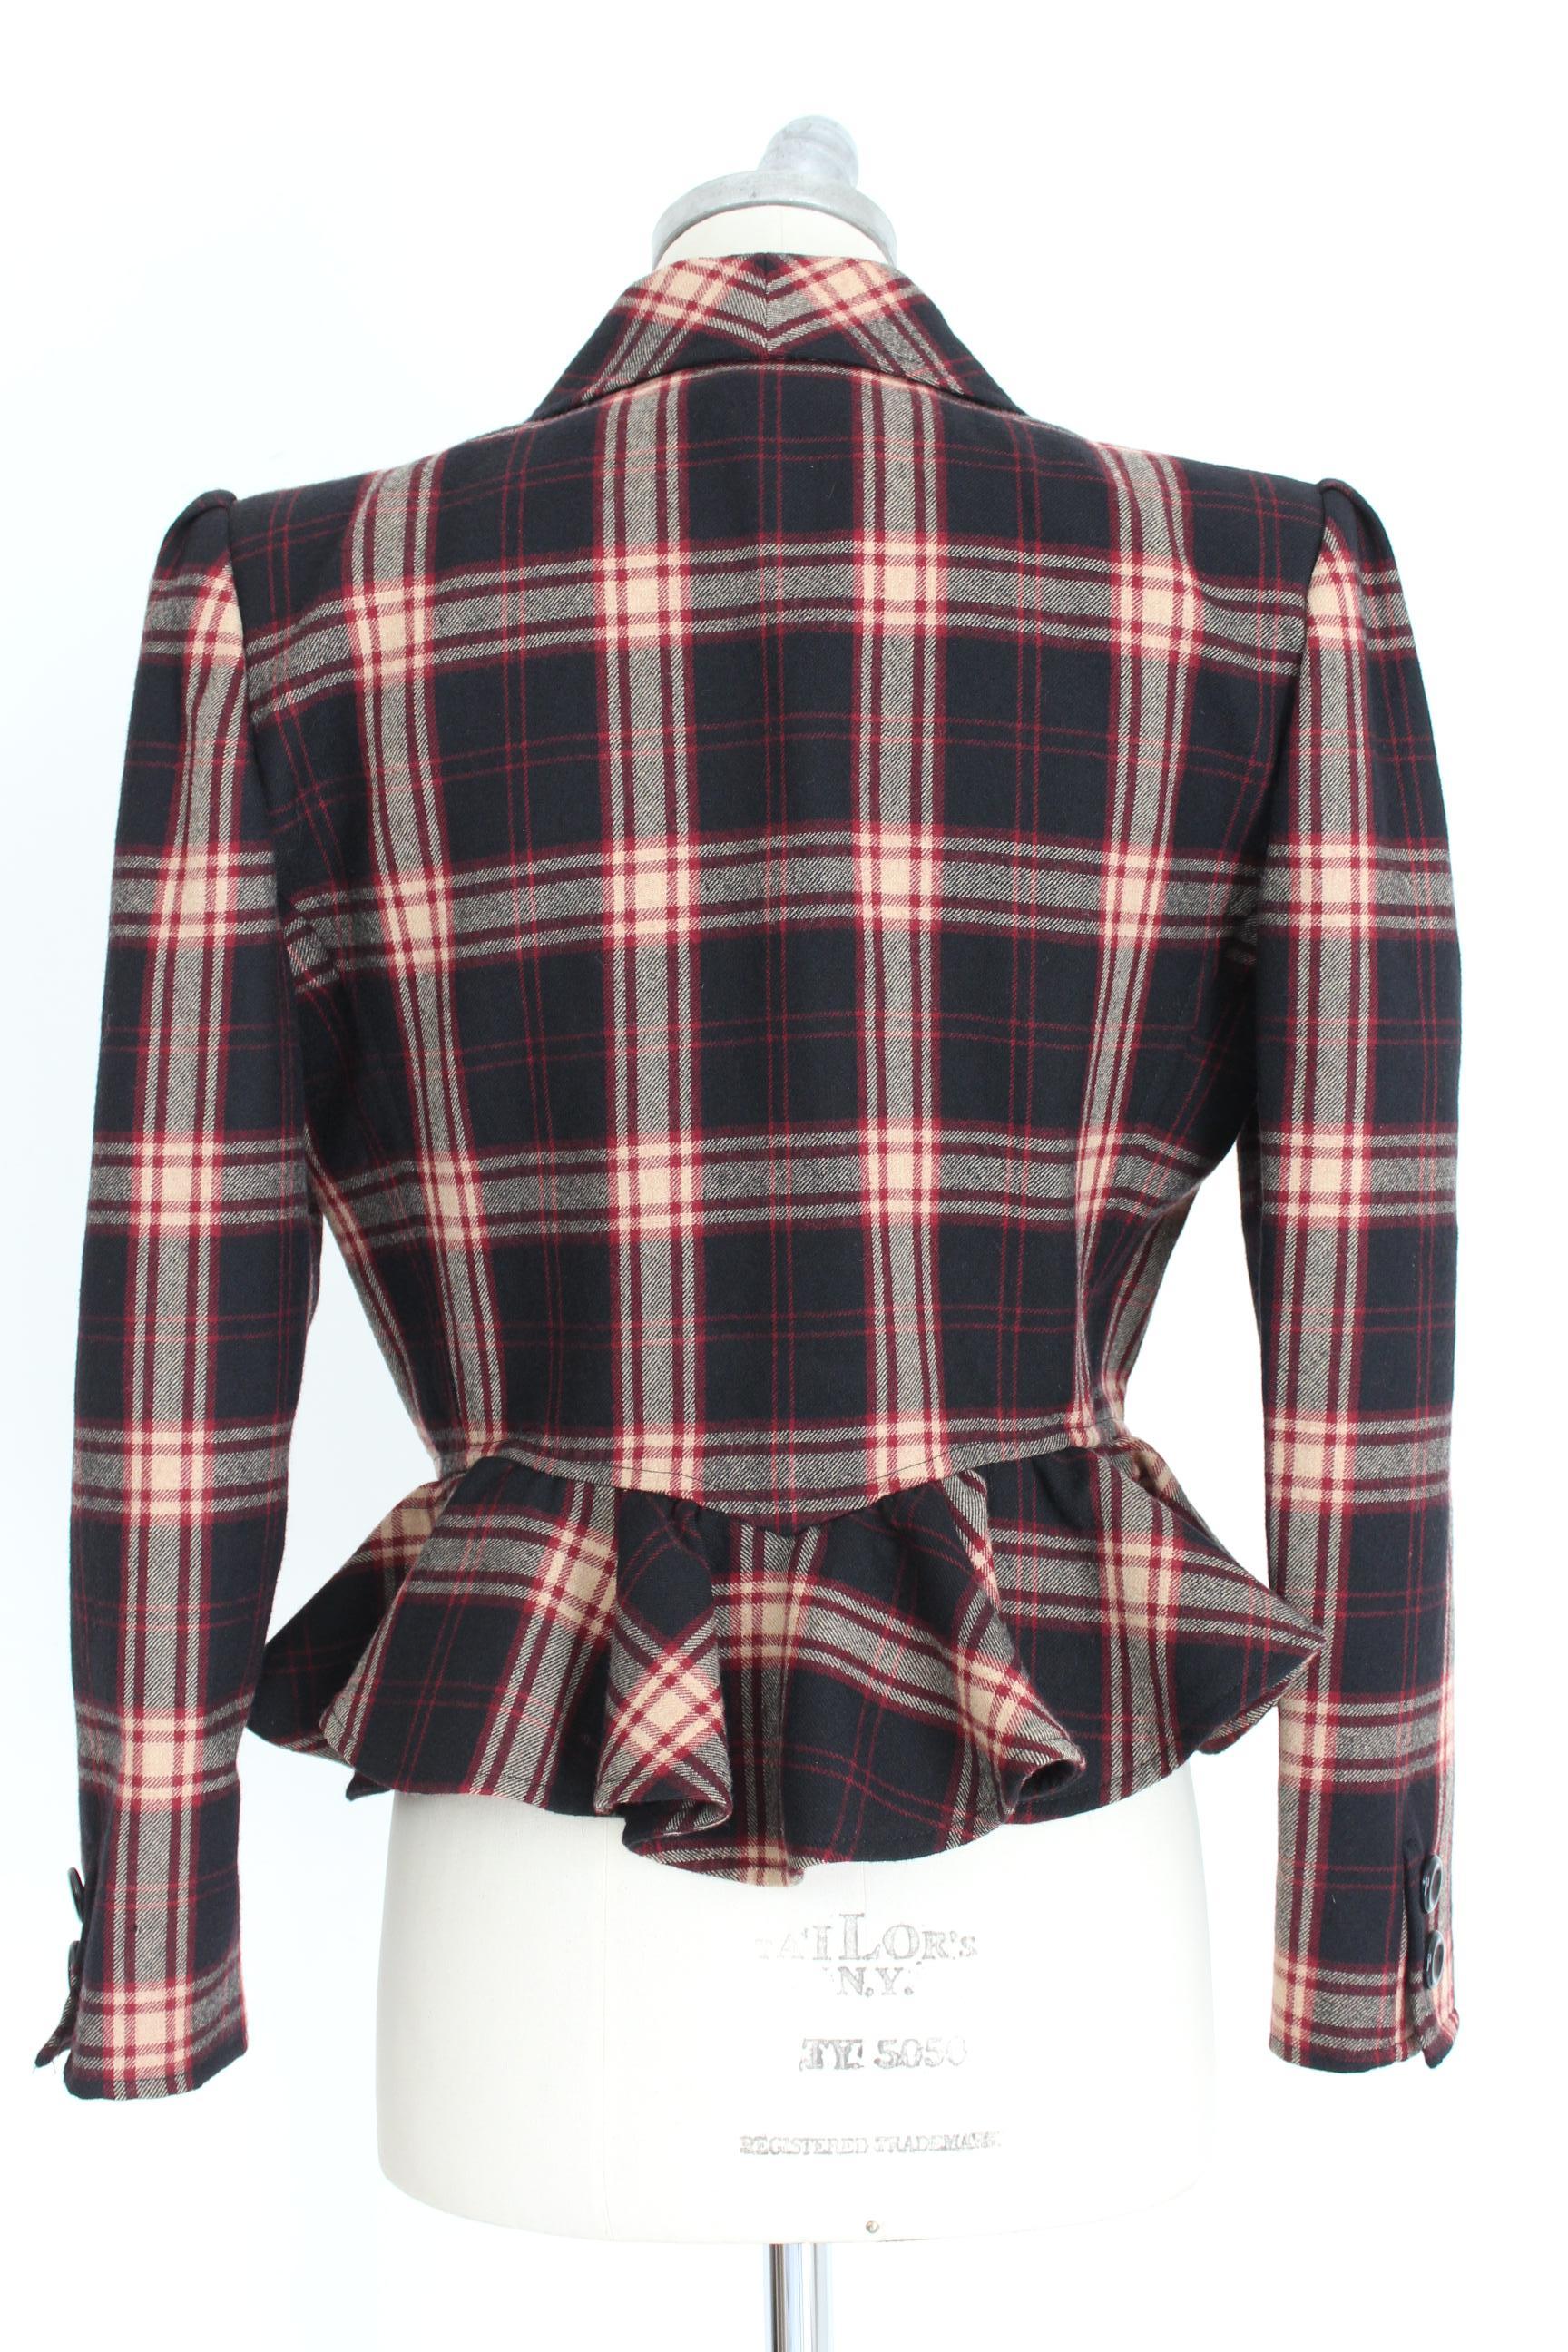 Valentino Boutique 80s vintage women's jacket. Short asymmetrical model, double-breasted. 100% wool. Burgundy and black checks color. Made in Italy. Excellent vintage conditions.

Size: 44 It 10 Us 12 Uk
Shoulder: 44 cm 
Bust / Chest: 50 cm 
Sleeve: